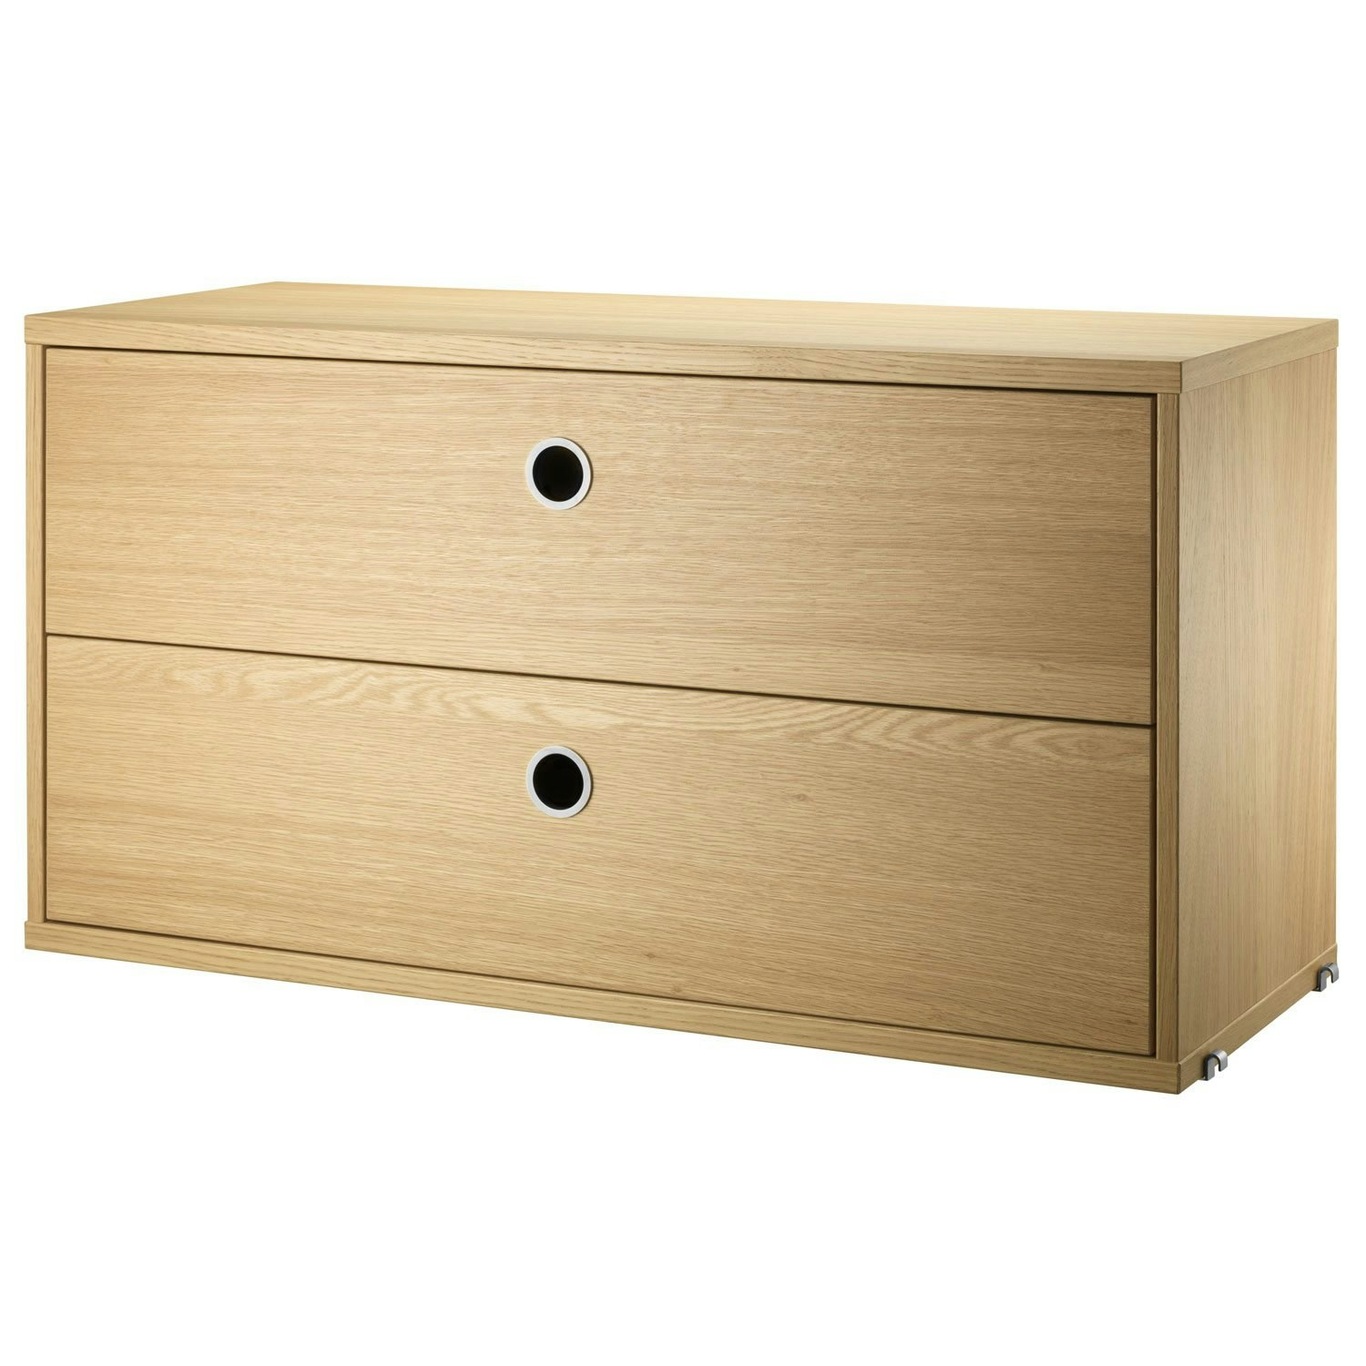 String Chest Of Drawers 78x30 cm, Oak